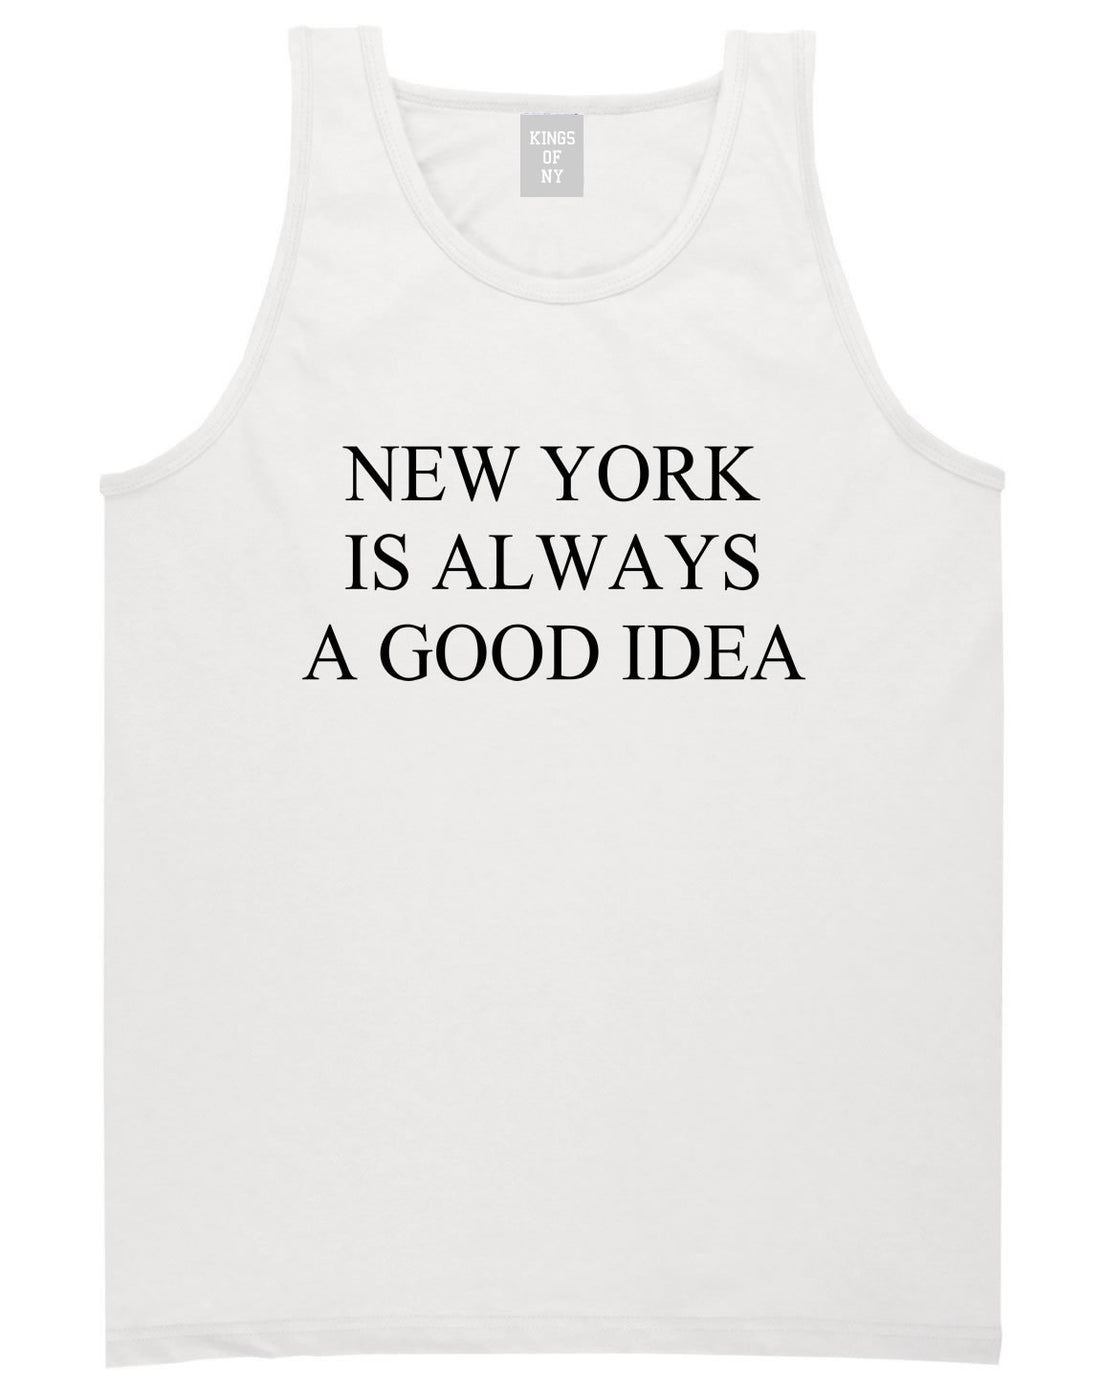 New York Is Always A Good Idea Tank Top in White by Kings Of NY